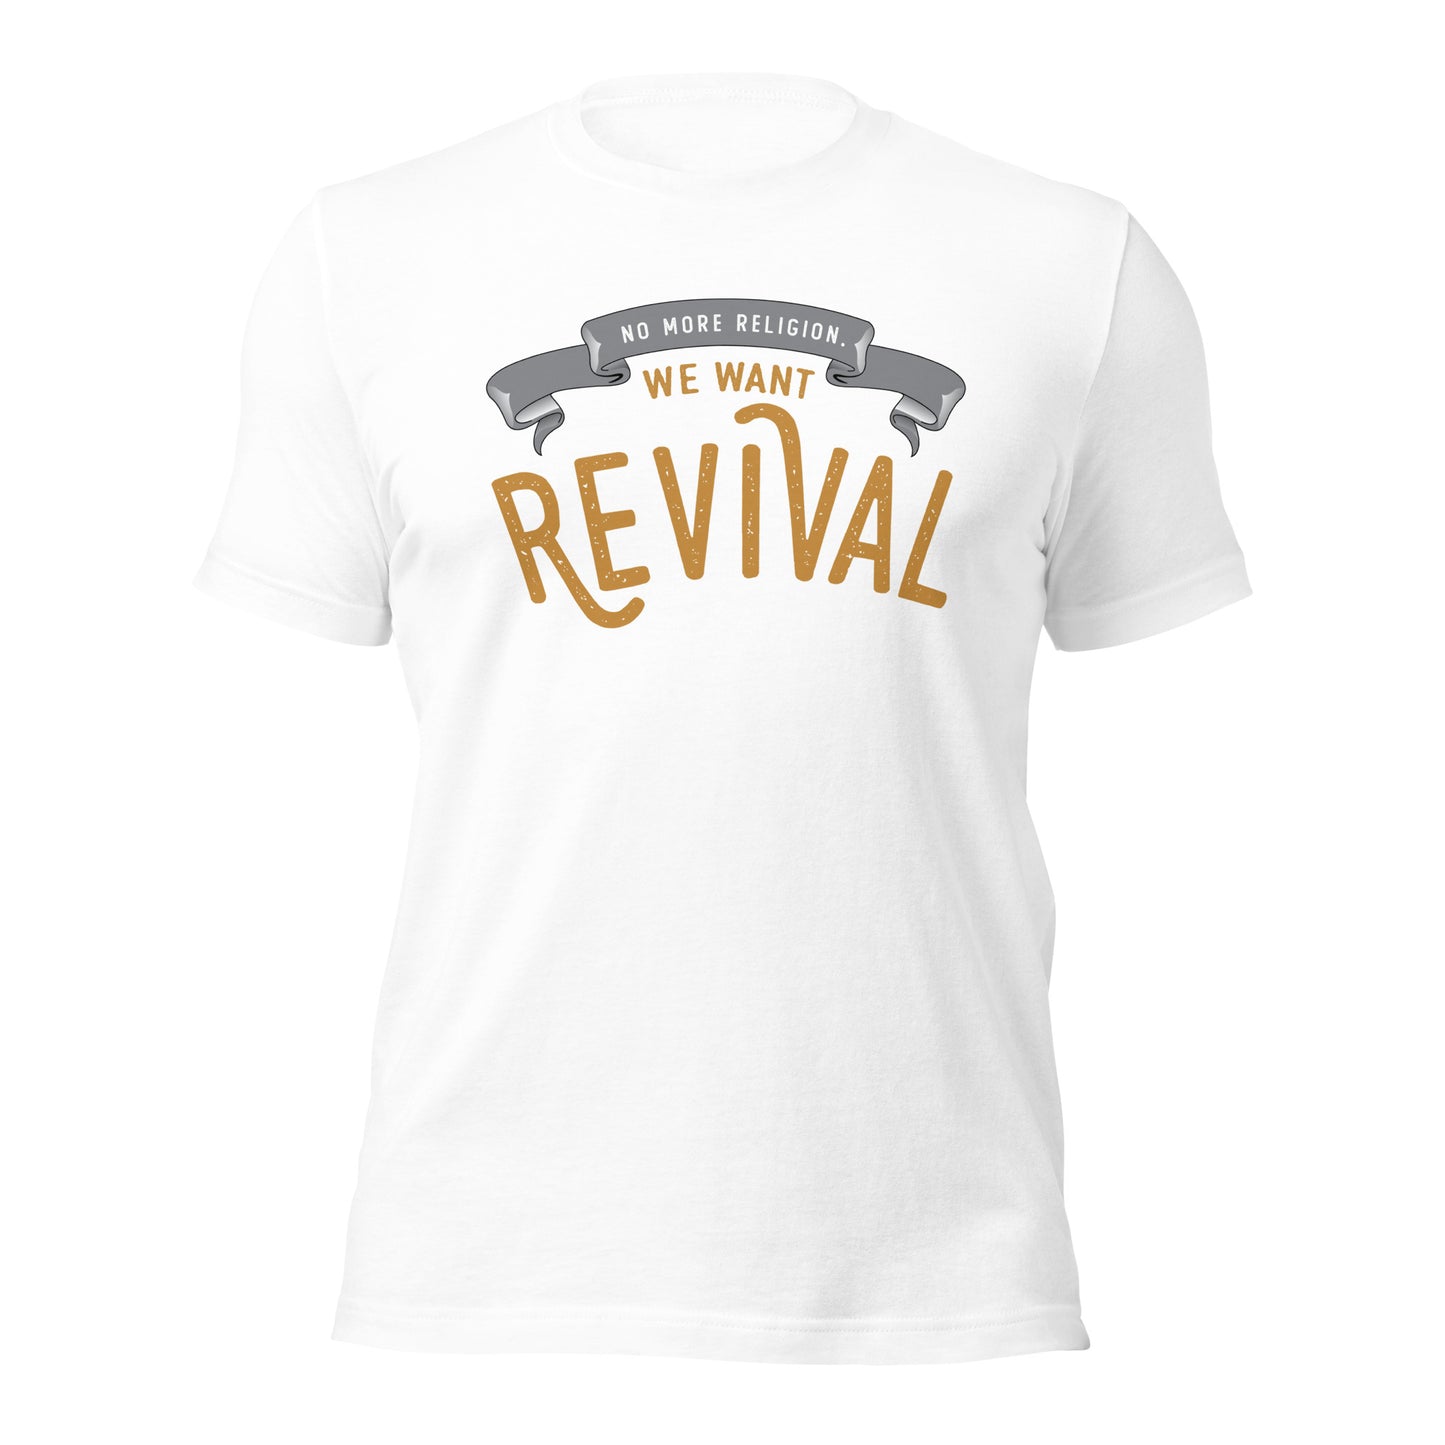 White Christian aesthetic soft Unisex T-shirt that says, No More Religion We Want Revival printed in gold and black, church gift Jesus graphic tees designed for men and women 